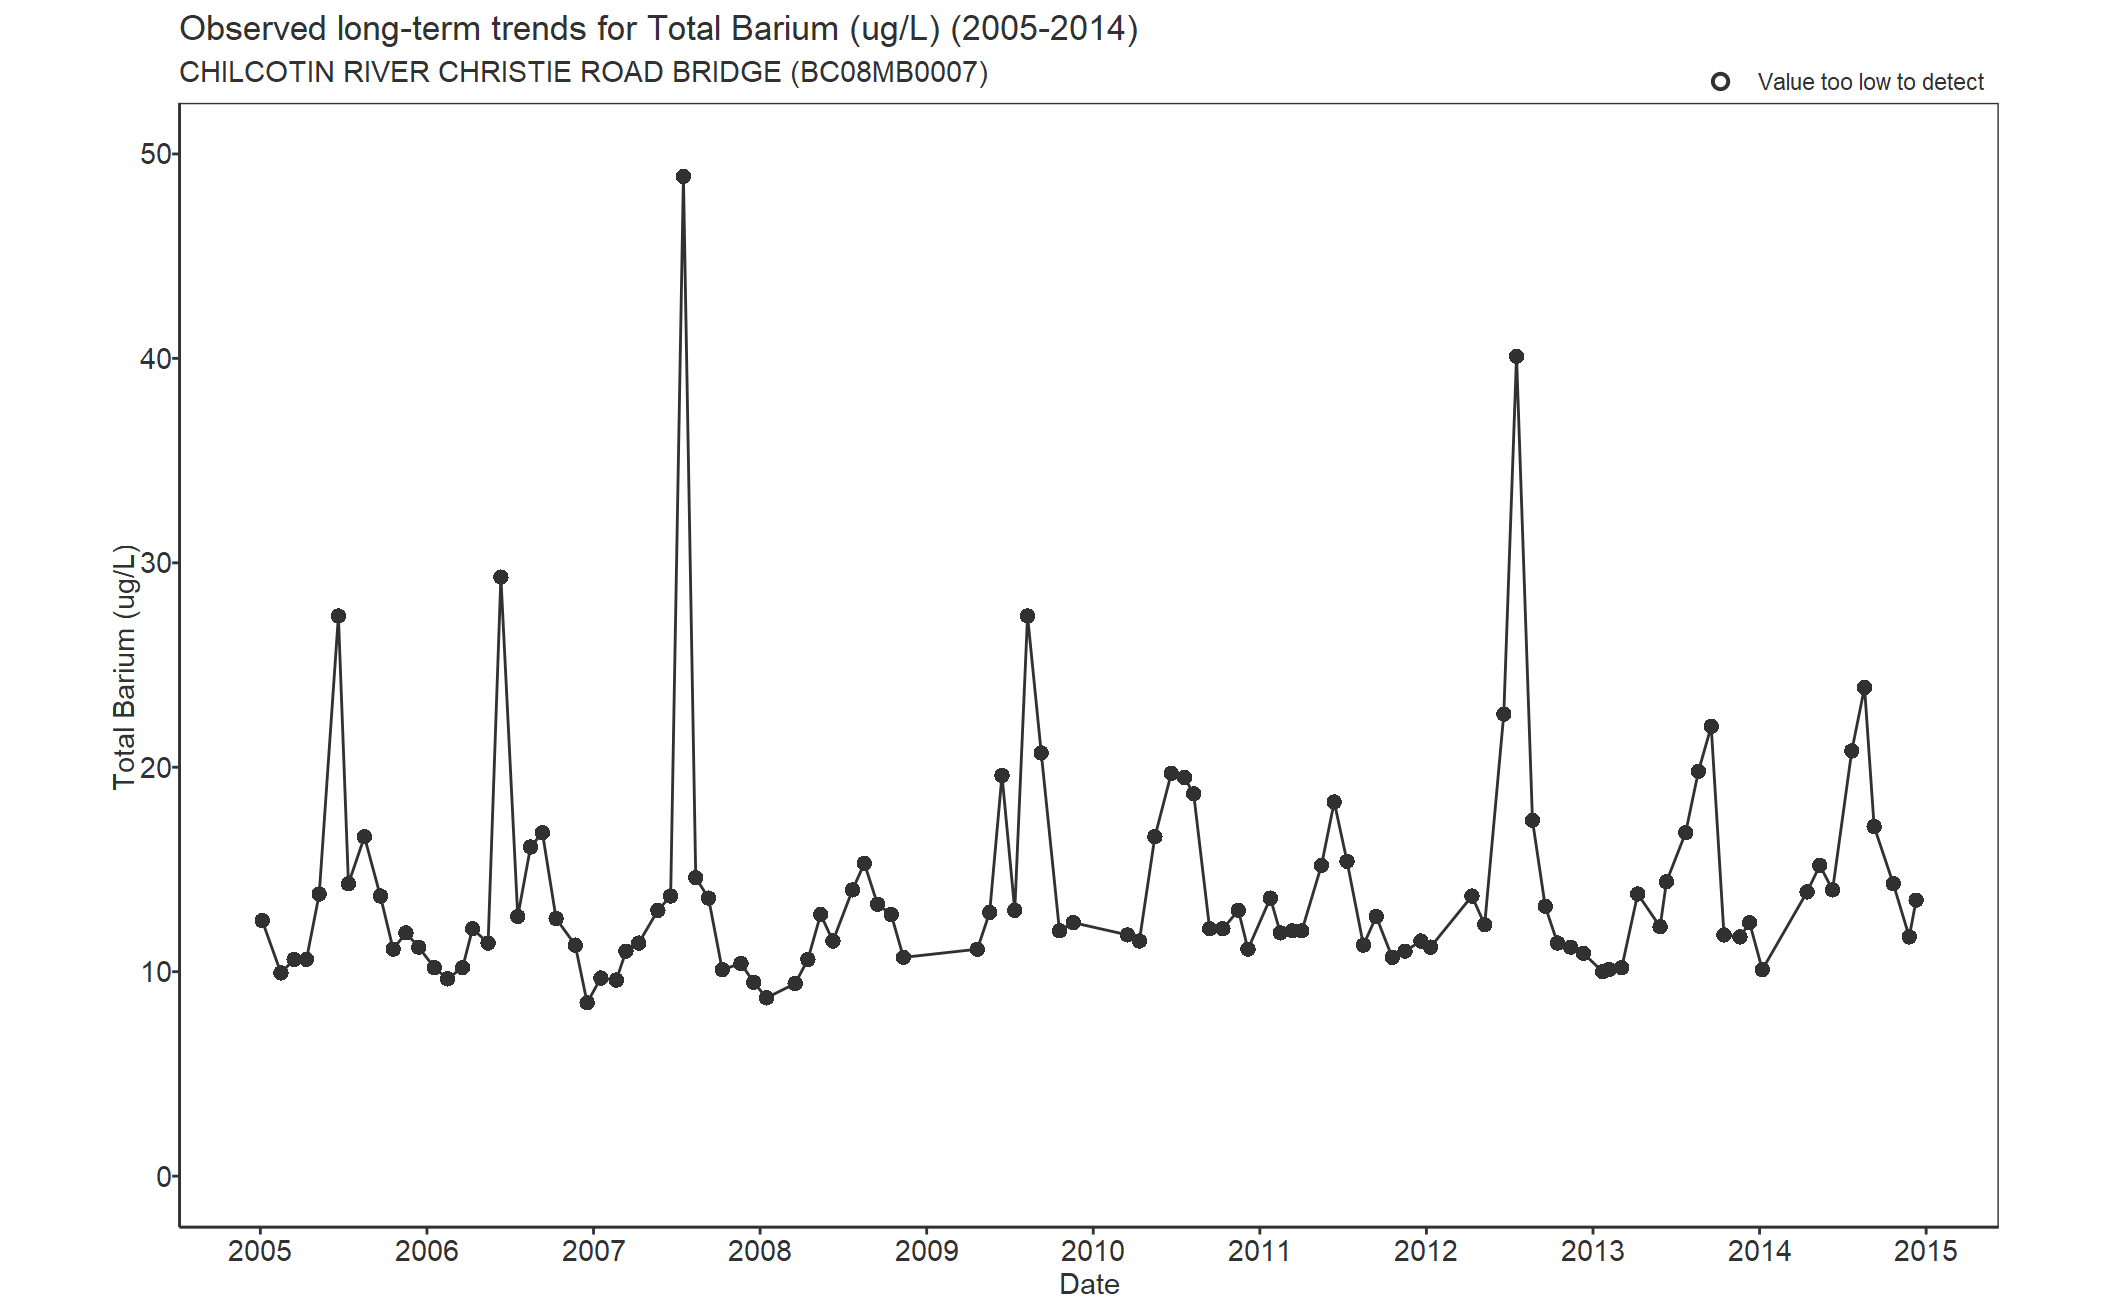 Observed long-term trends for Barium Total (2005-2014)